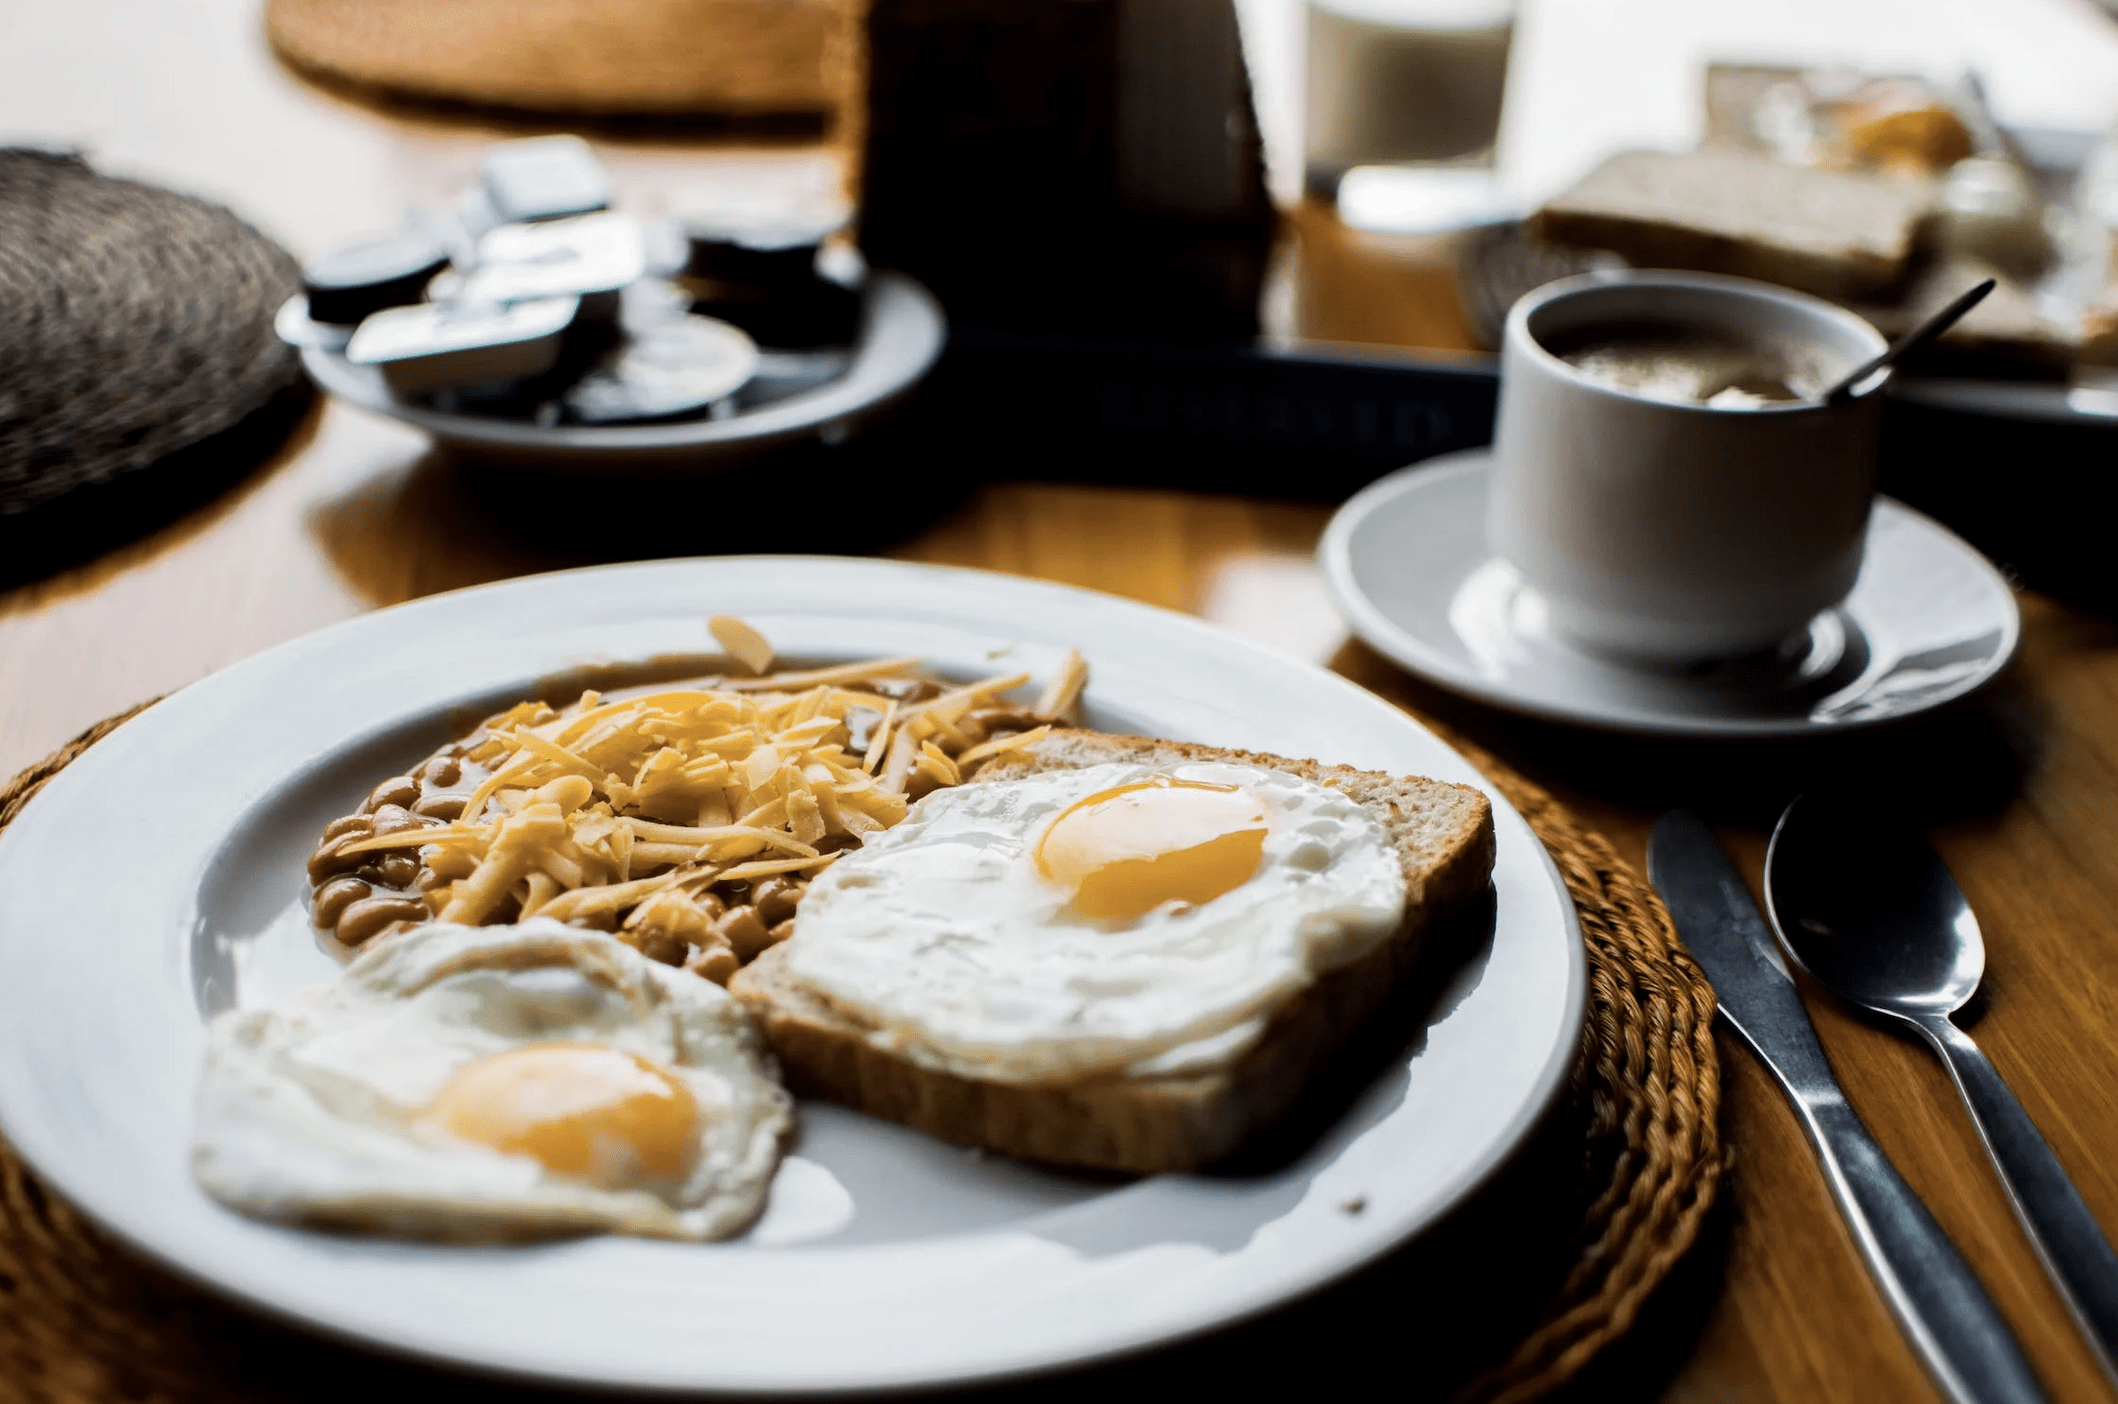 The Ultimate Brunch Guide - 4 Spots You Can't Miss in the UK